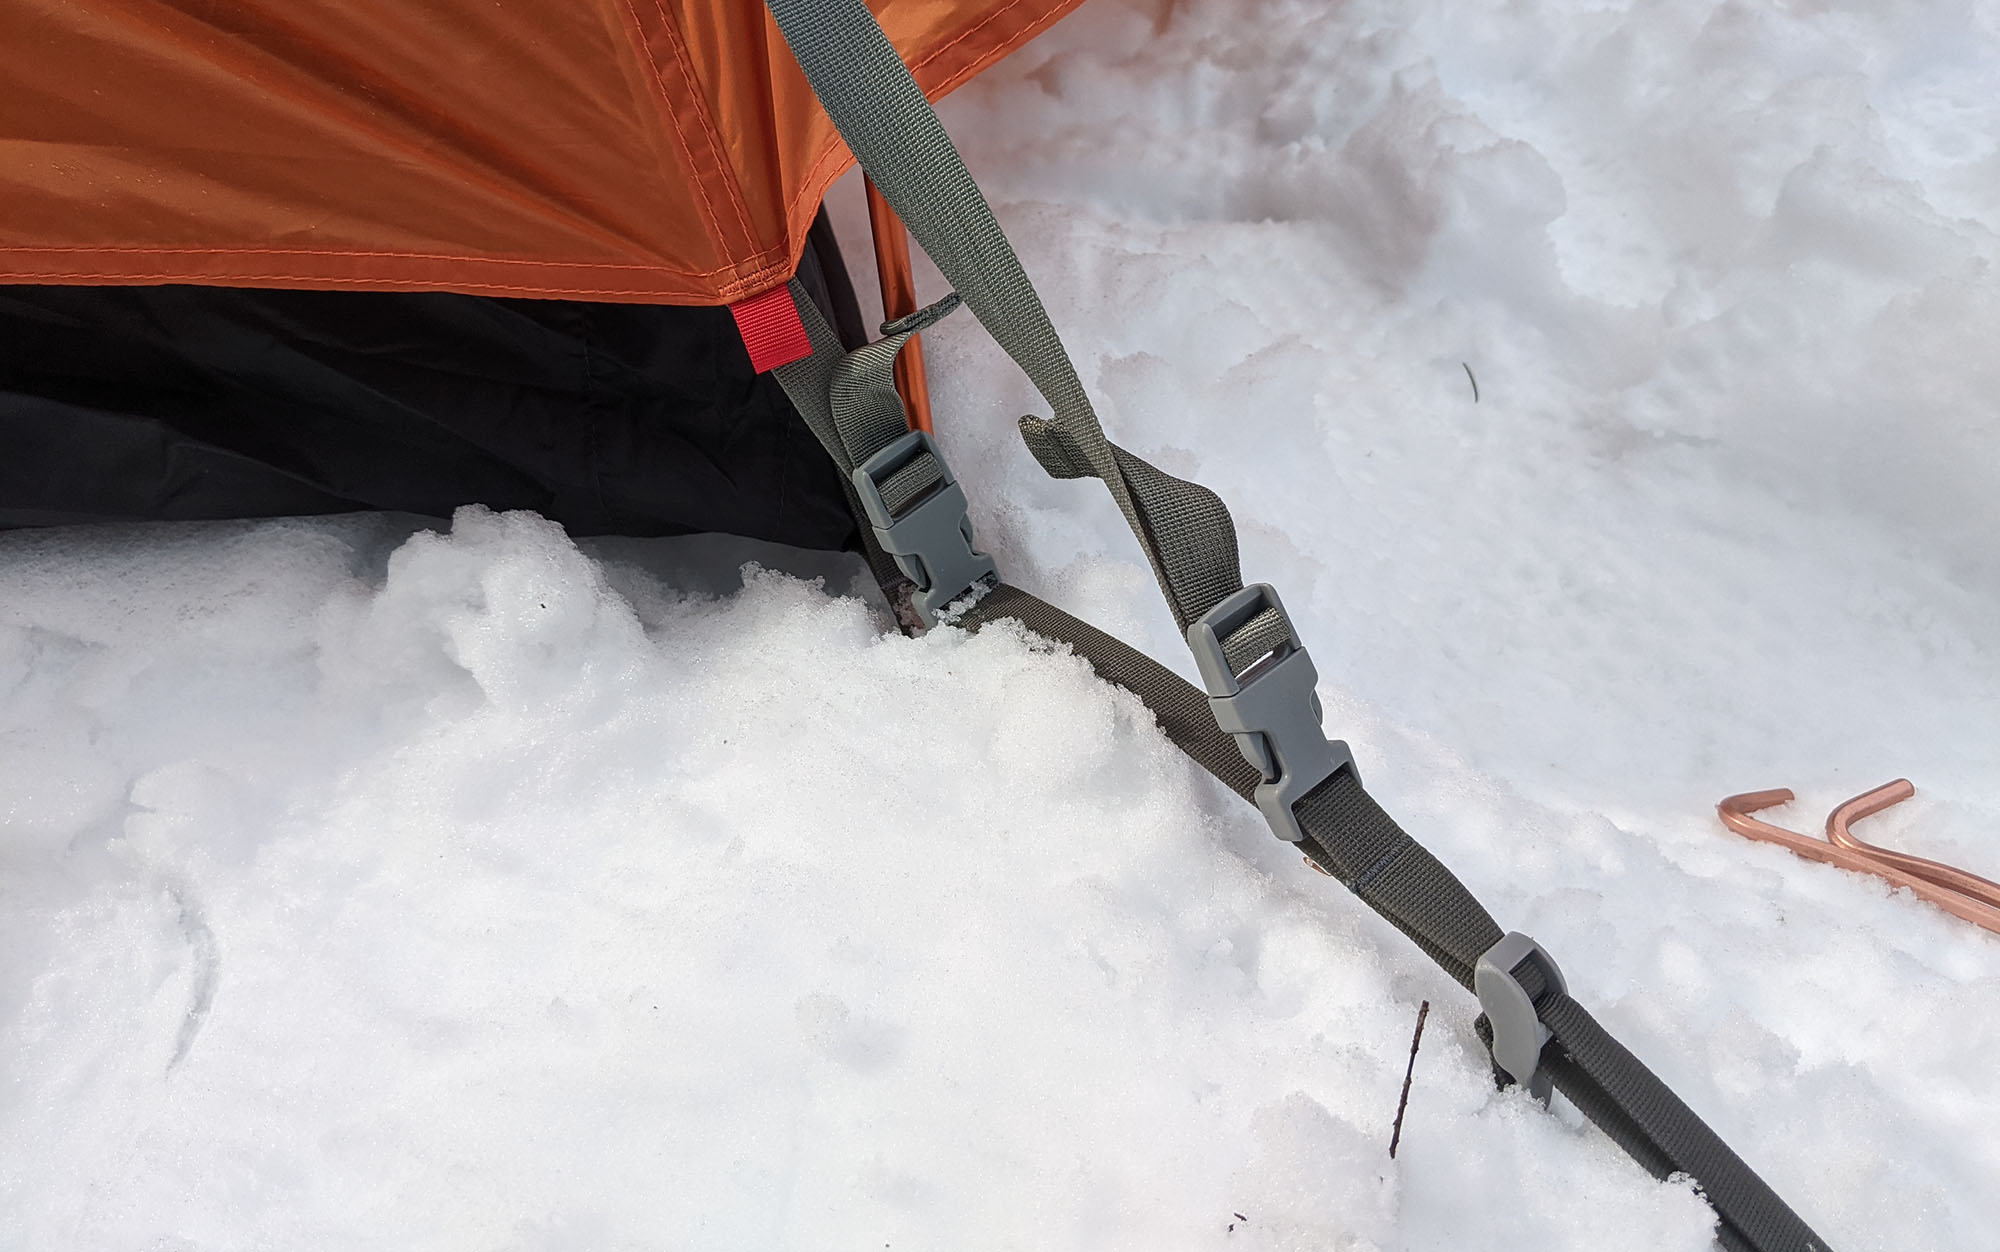 The double straps of the Marmot Fortress were fiddly to use and did not provide a level of tension that I would be comfortable with in adverse conditions.